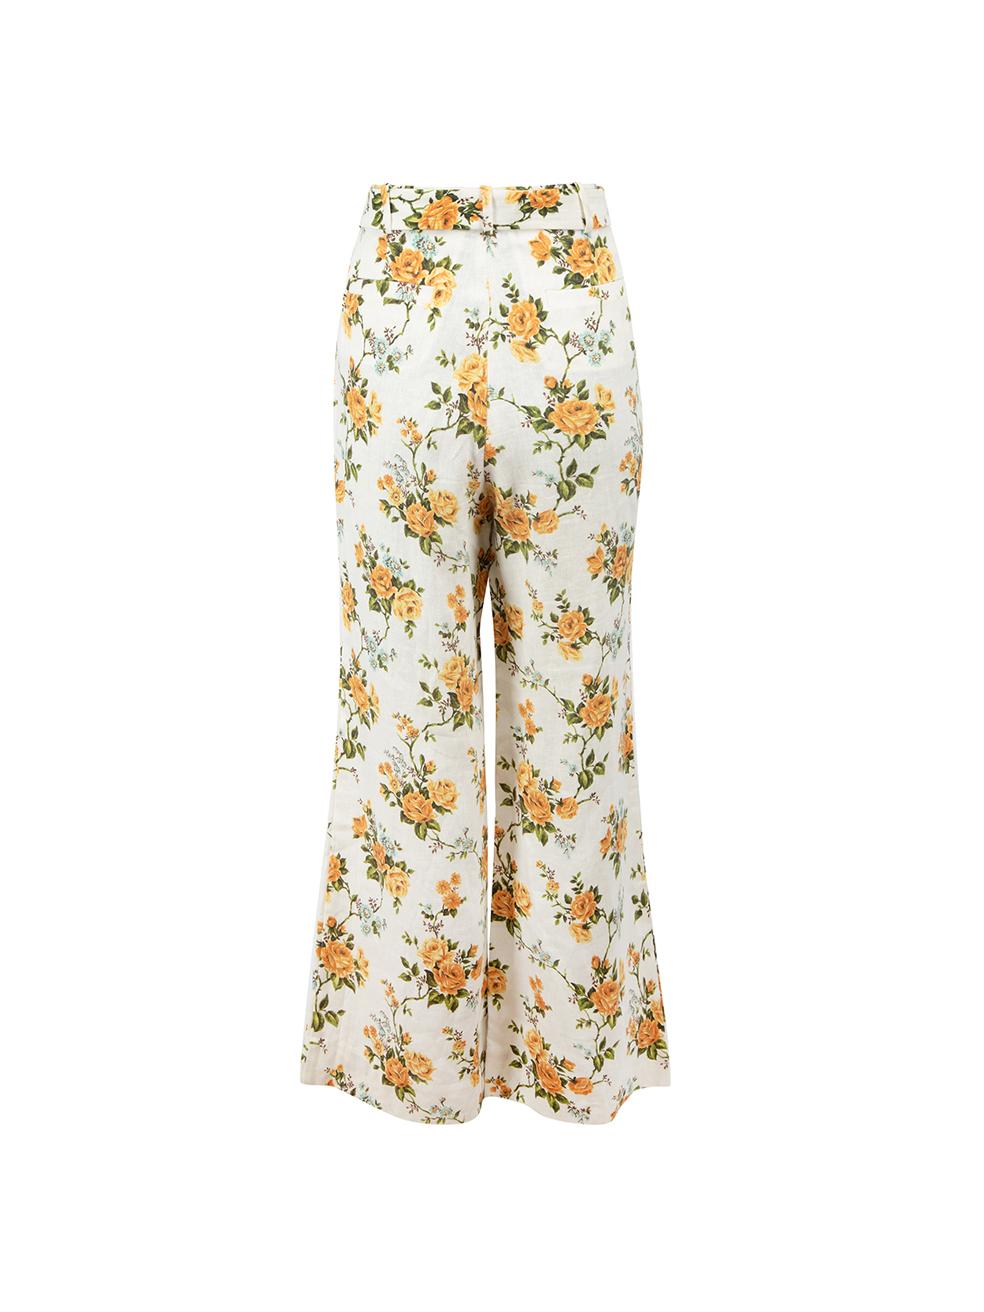 Zimmermann White Linen Floral Print Belted Culottes Size M In Good Condition For Sale In London, GB